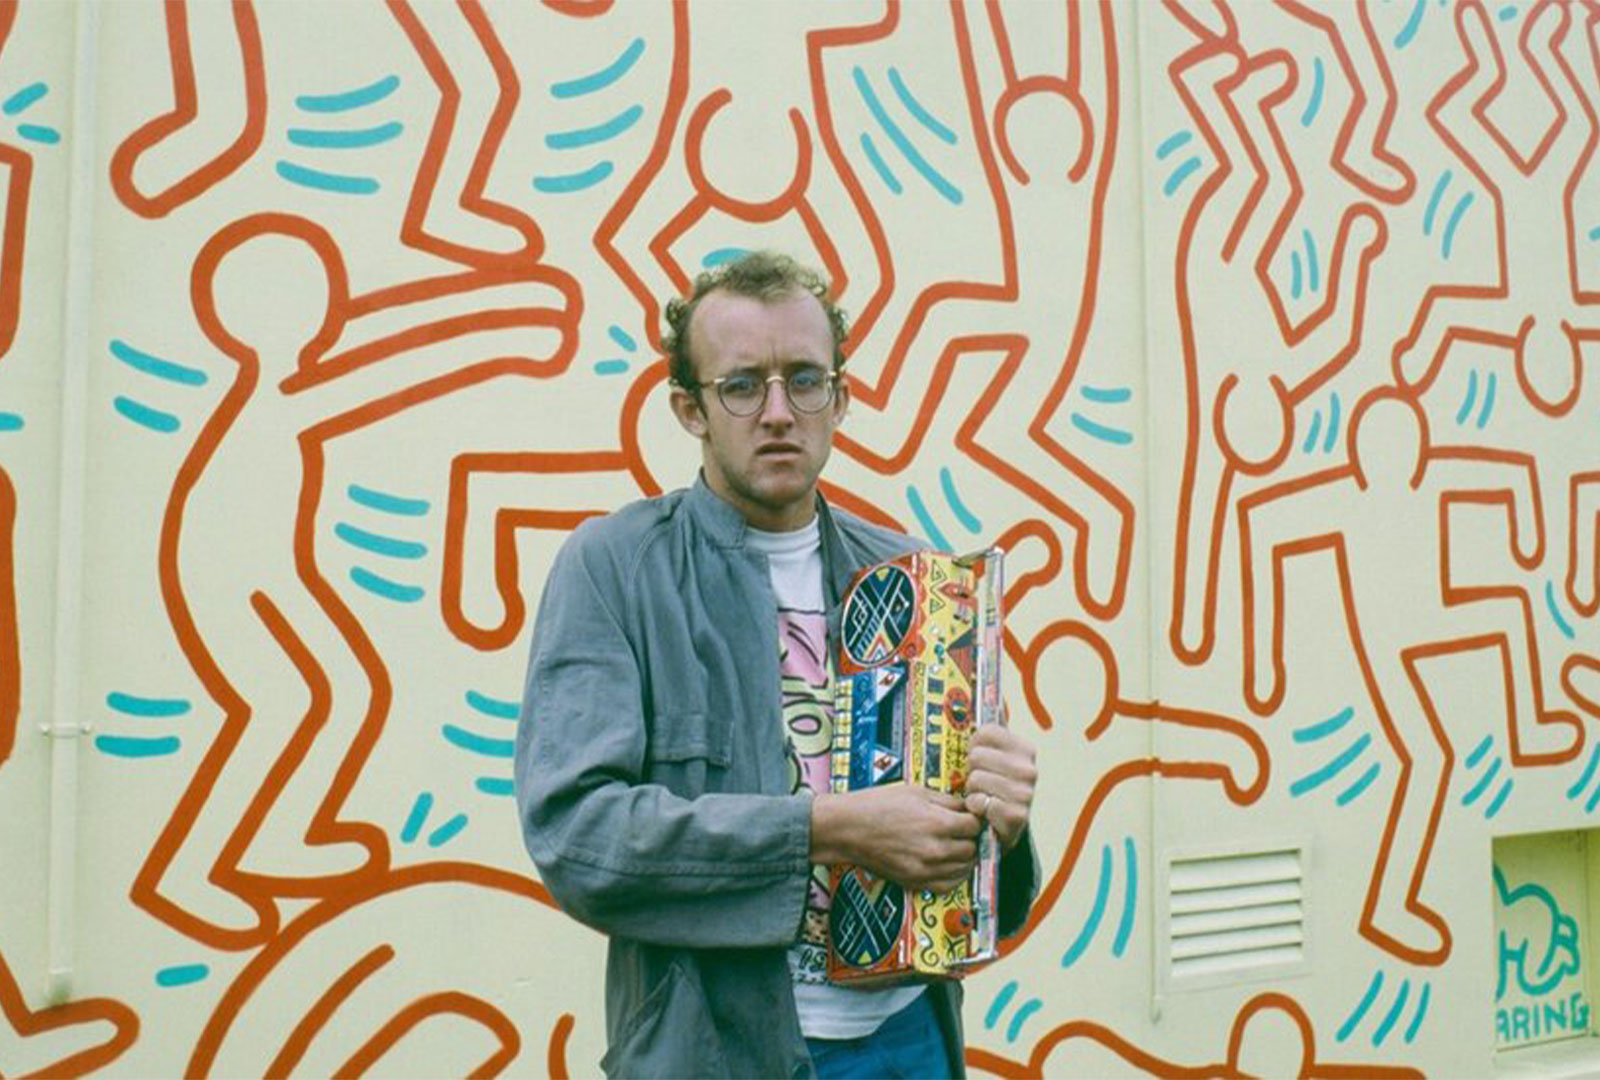 Keith Haring S Life Explored In New Film Keith Haring Street Art Boy